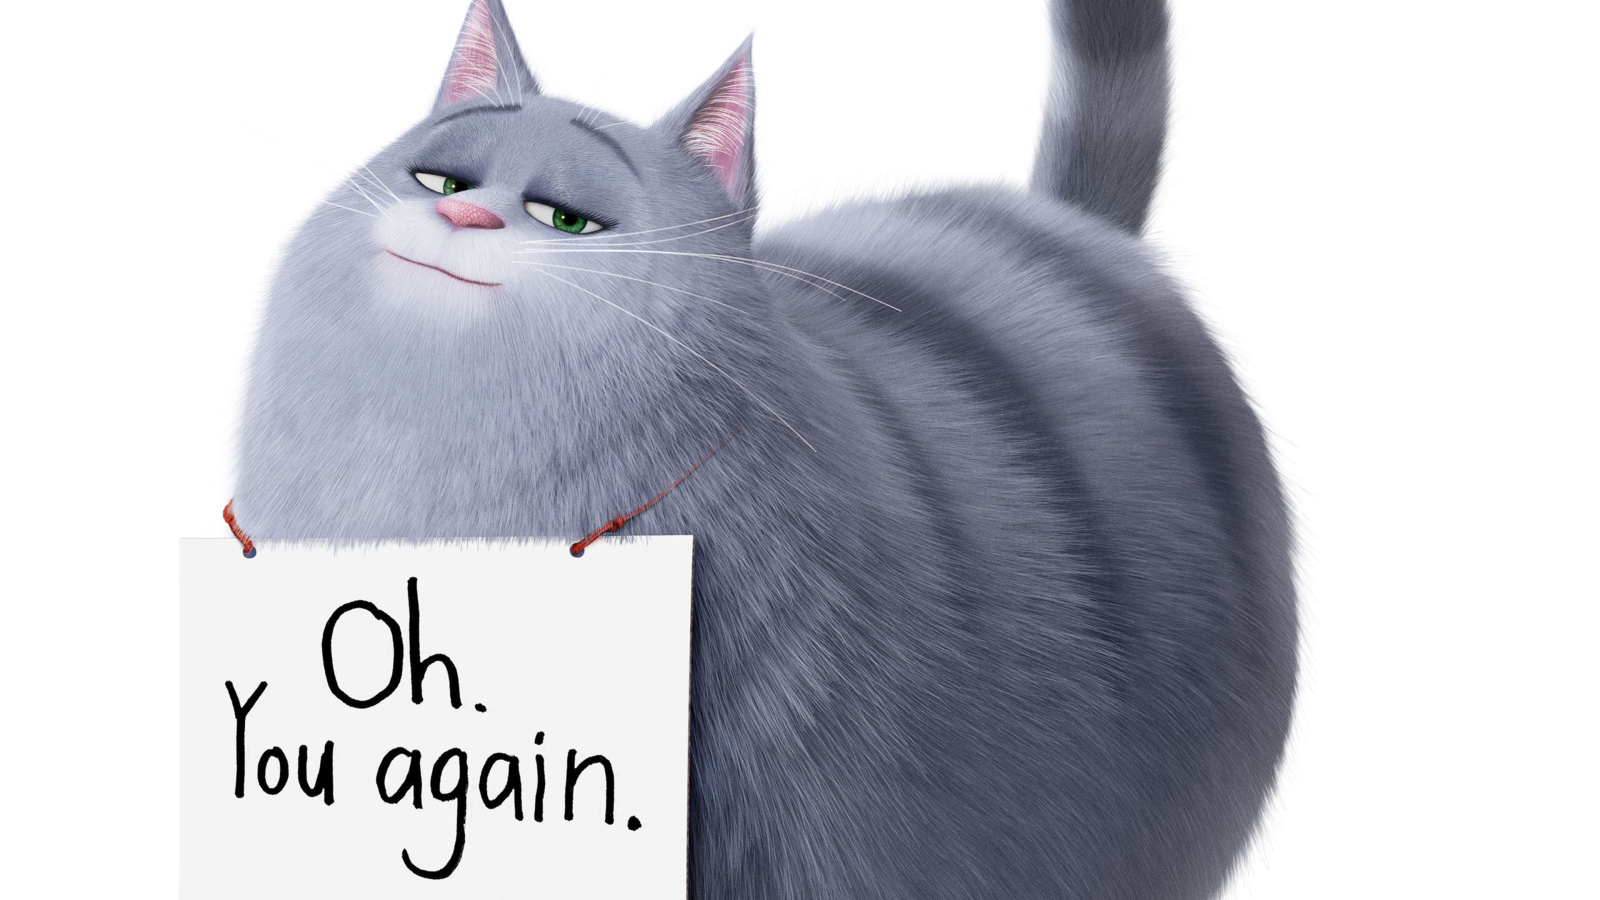 Chloe the Cat from the Secret Life of Pets 2 on a white background